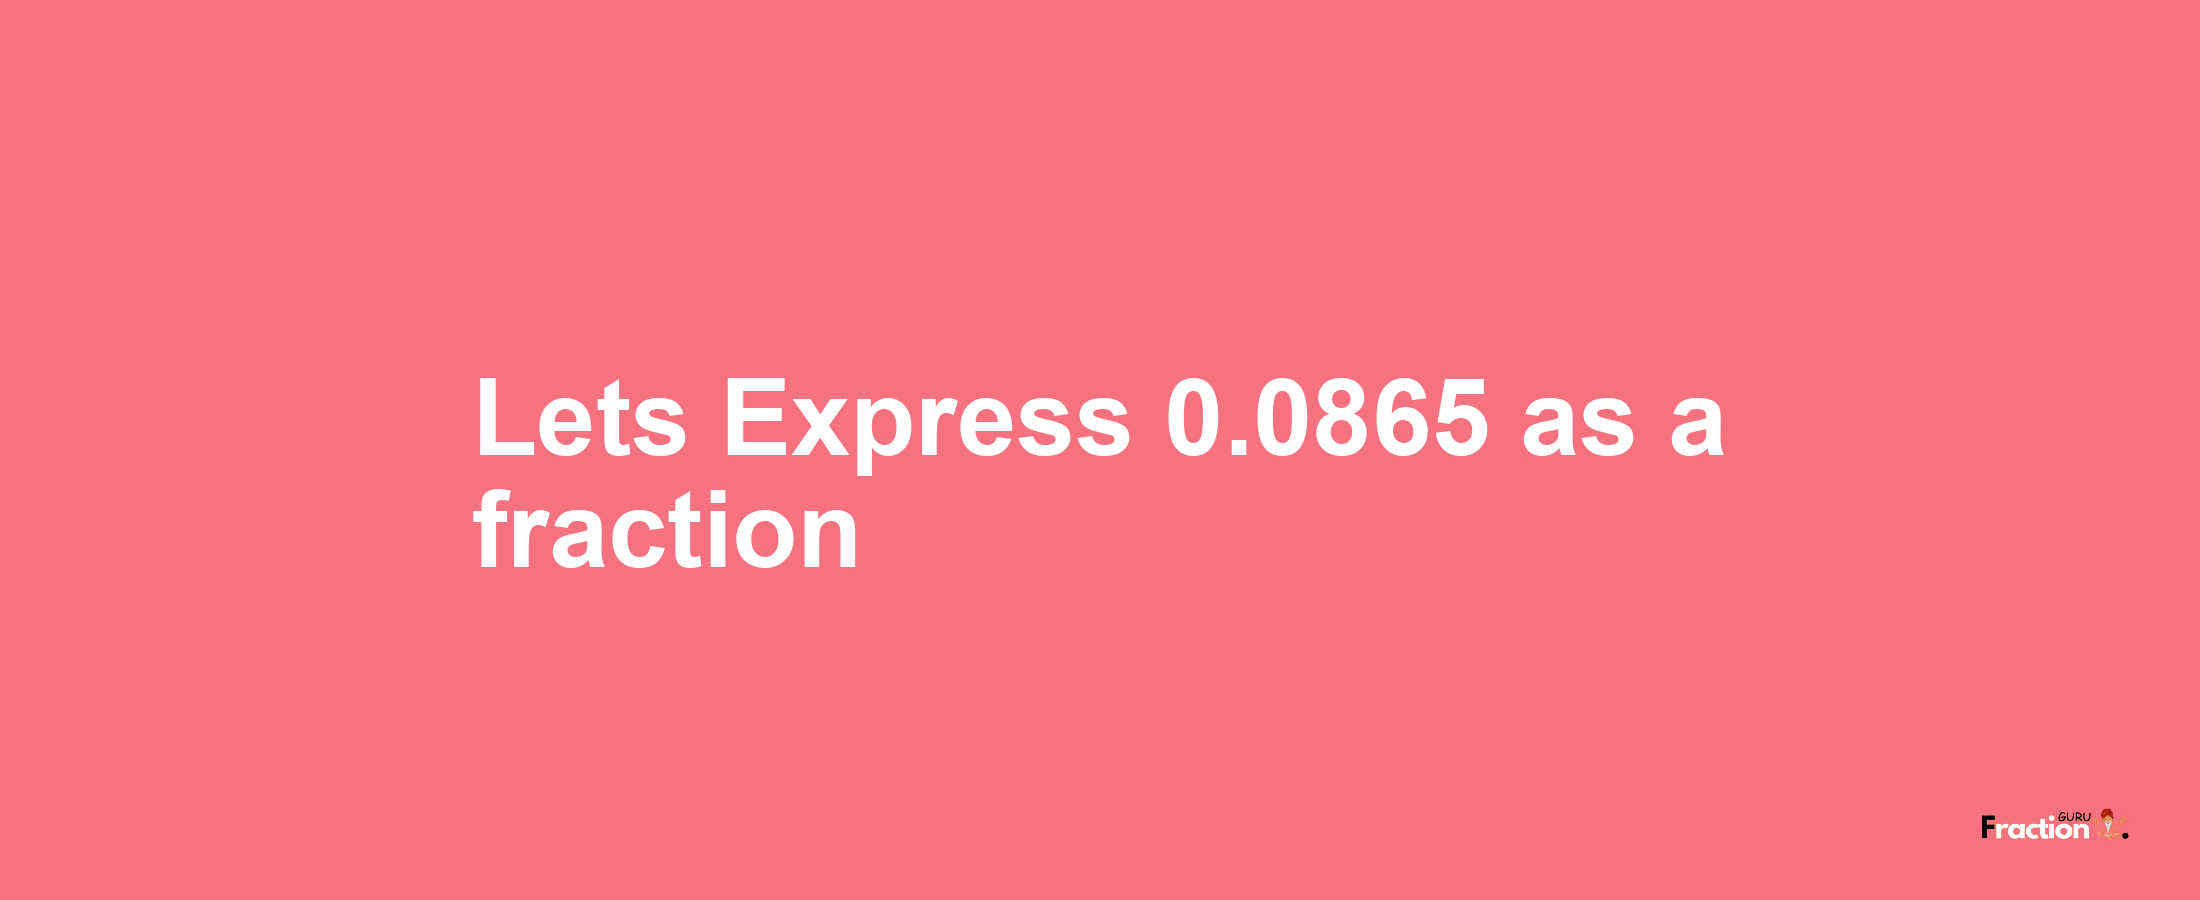 Lets Express 0.0865 as afraction